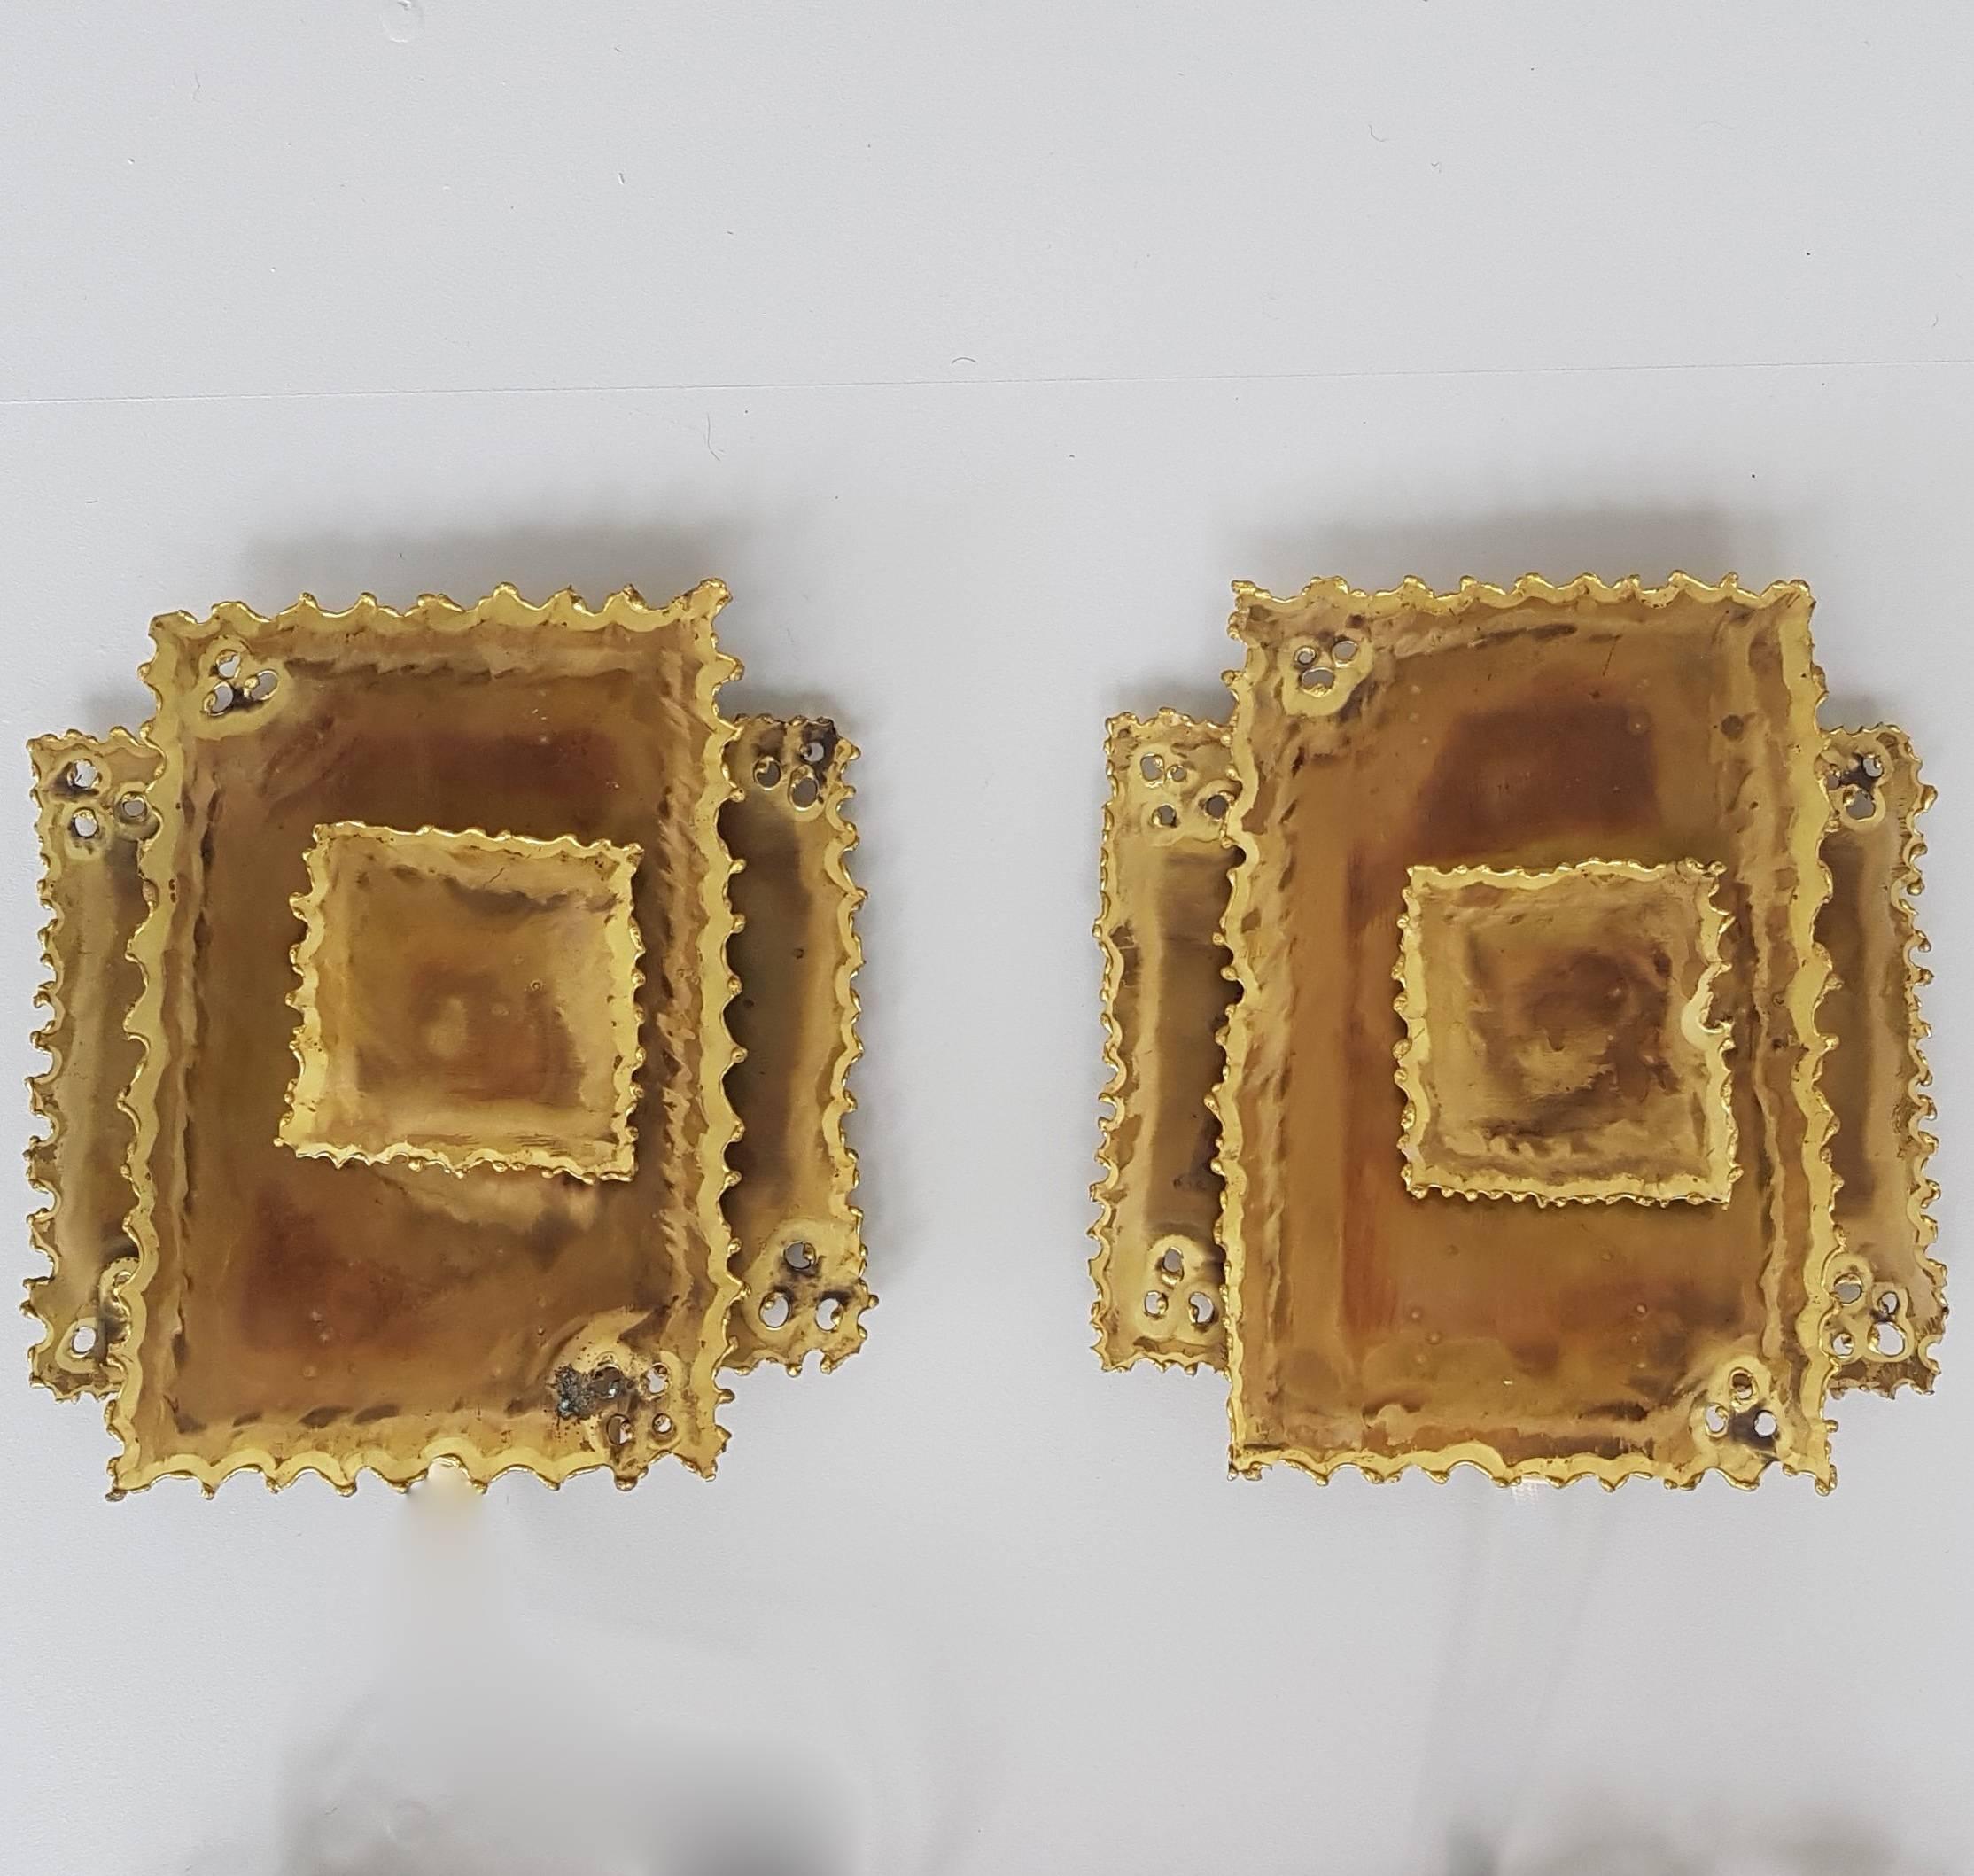 Two vintage Danish brass wall sconces made by Holm Sørensen & Co and designed by Svend Aage Holm Sørensen. The squares are made of acid treated brass. 

They are in very good condition and fully functional and ready to use.